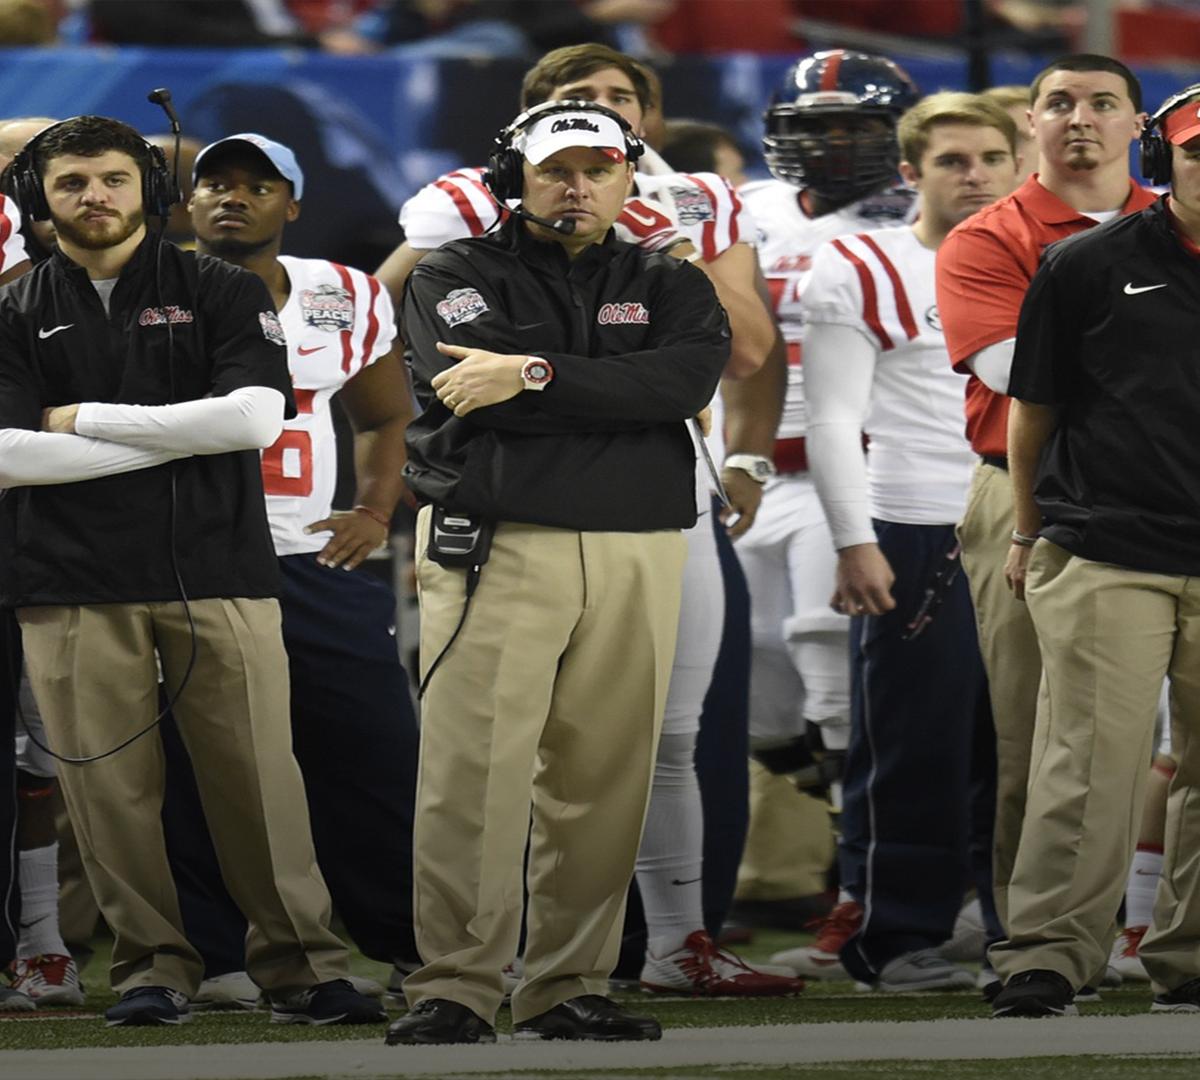 Ole Miss Football 2015: Complete Preview and Predictions for Rebels